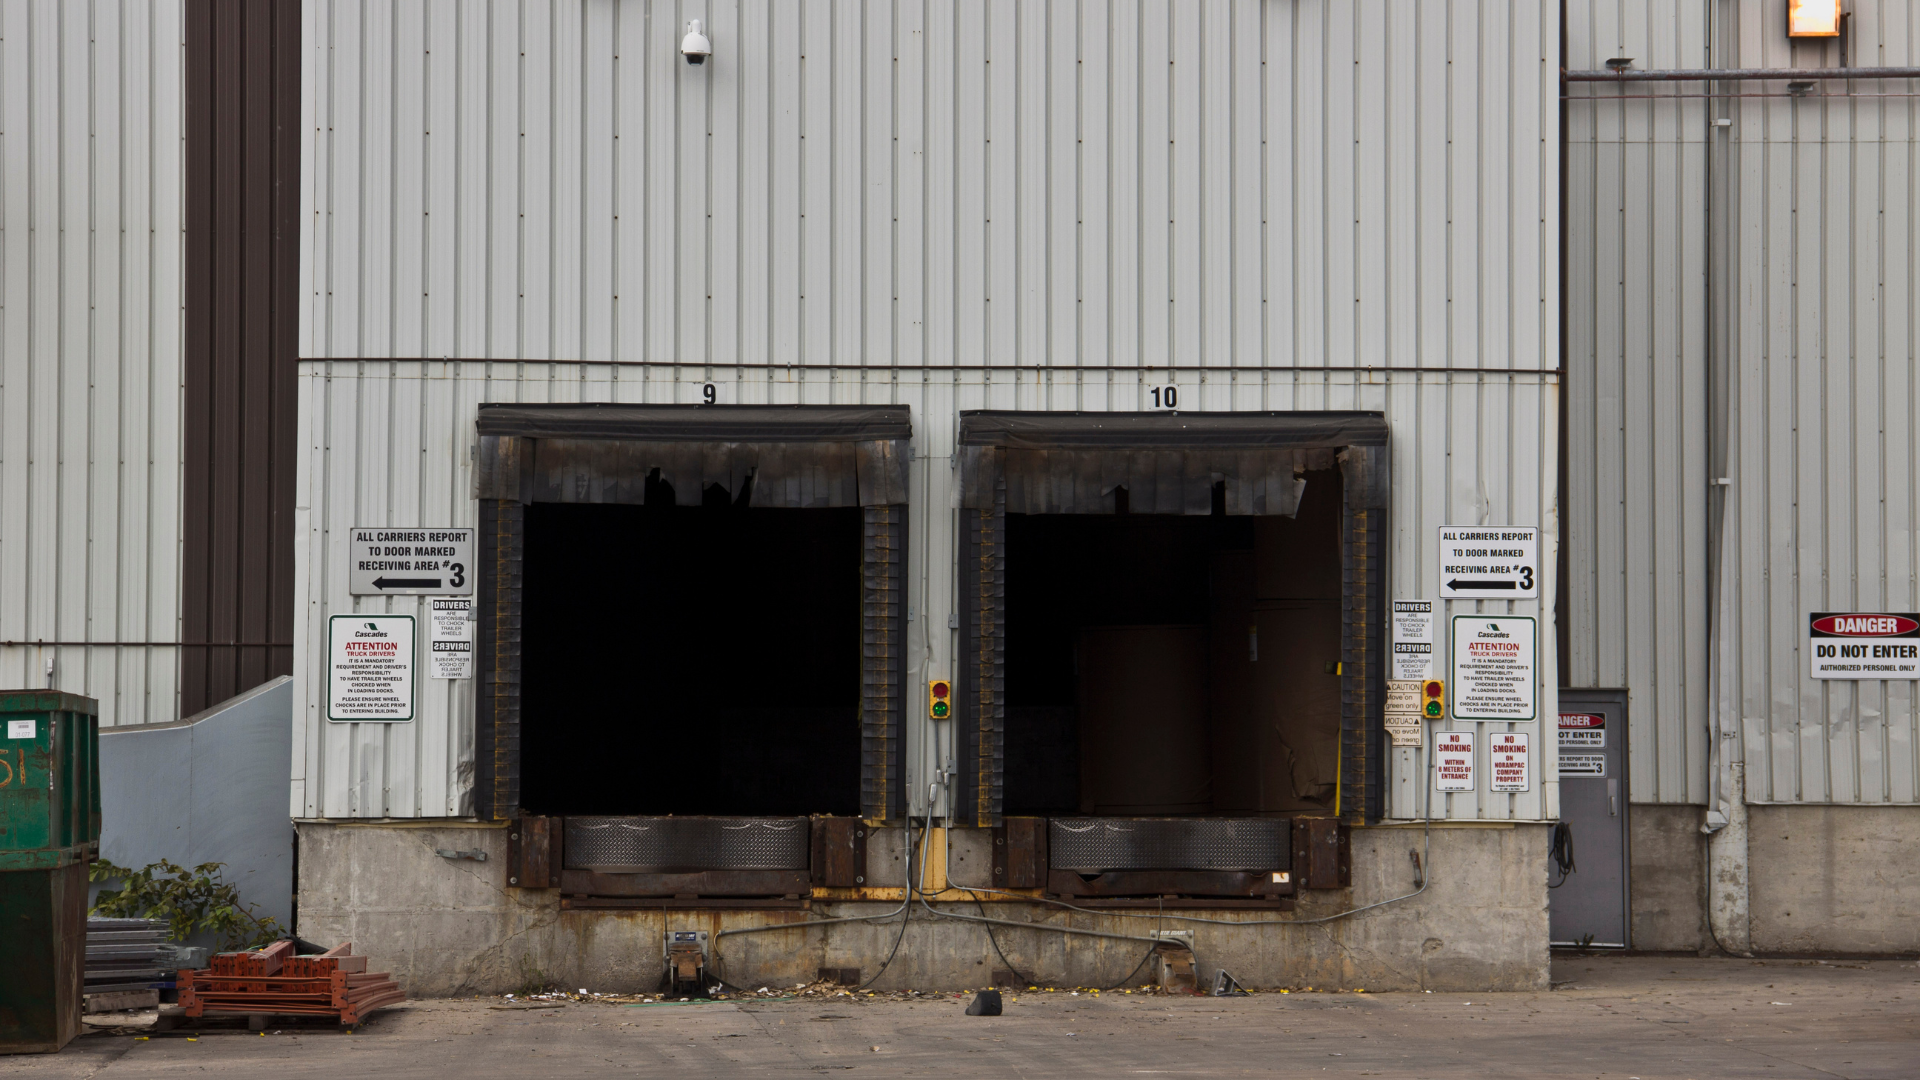 semi loading bays behind an industrial building with a stack of used wooden palettes